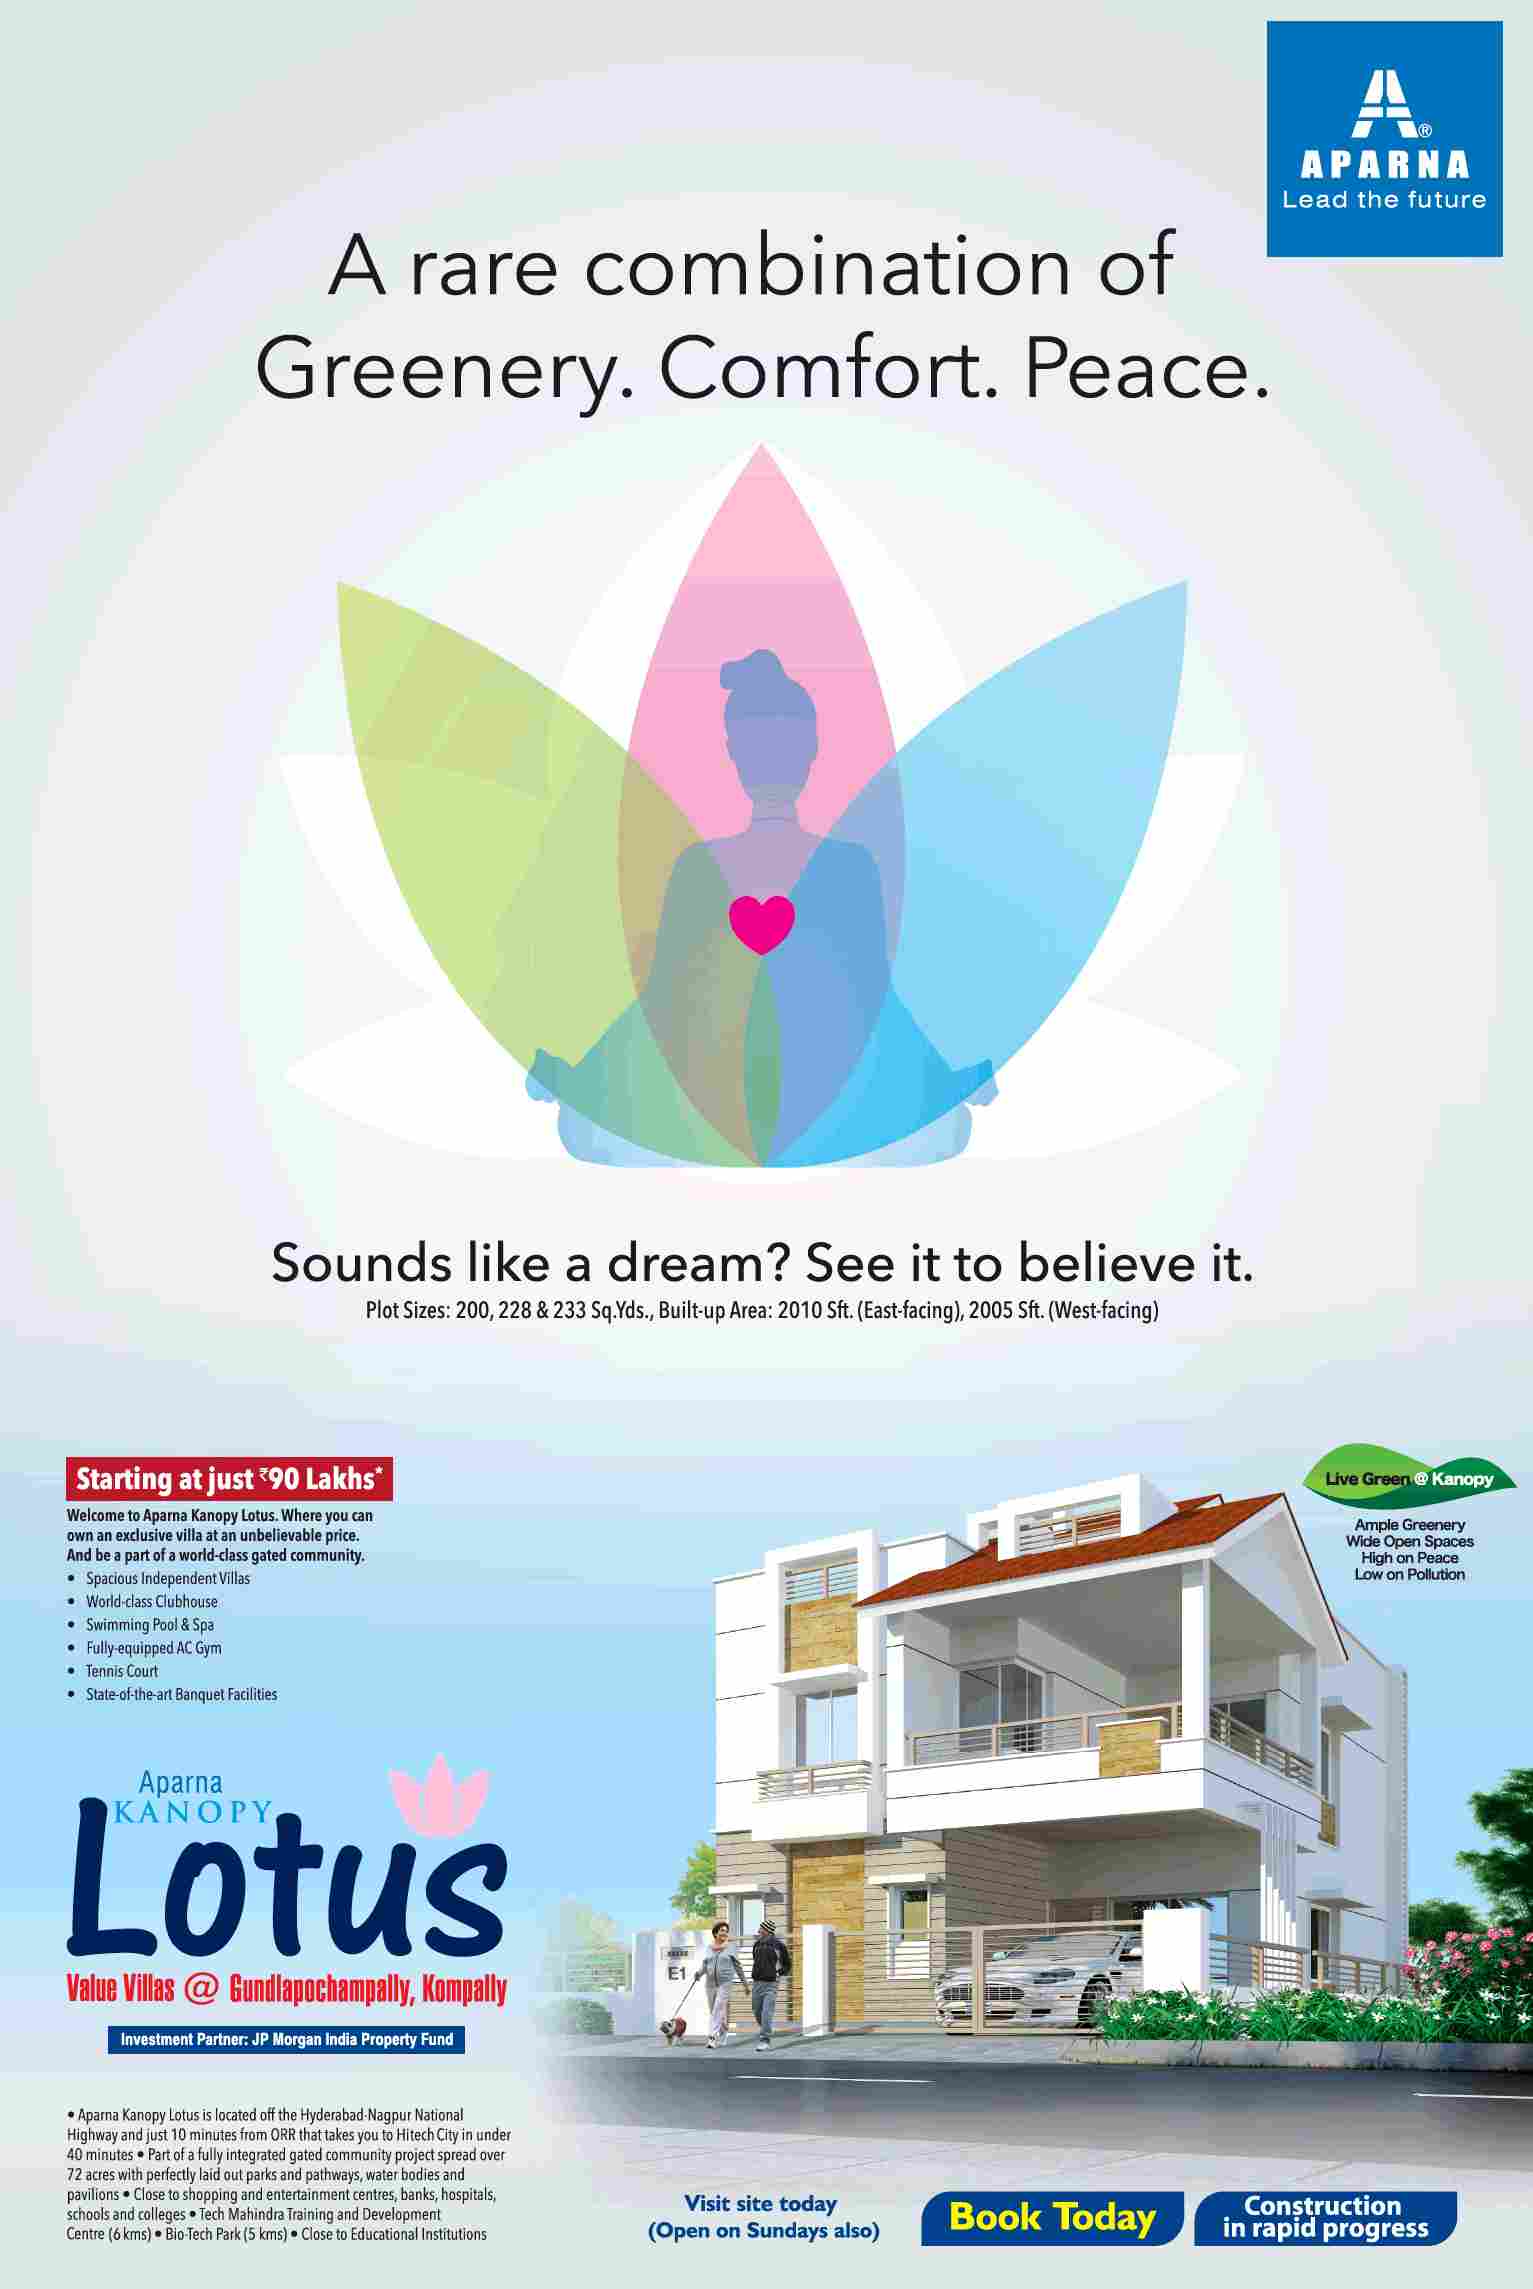 Experience a rare combination of greenery, comfort & peace at Aparna Kanopy Lotus in Hyderabad